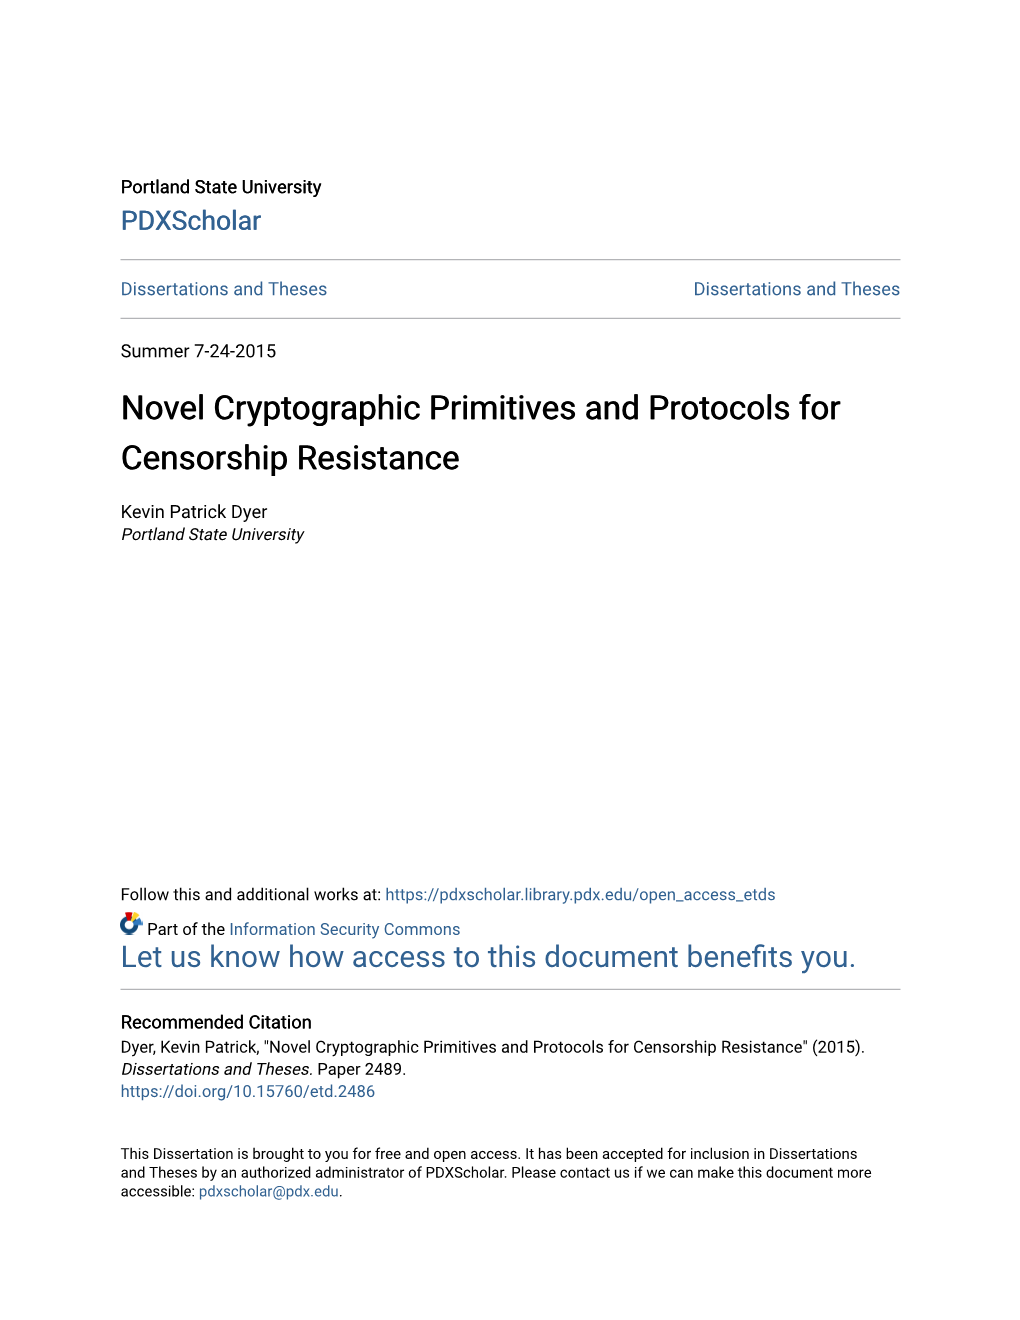 Novel Cryptographic Primitives and Protocols for Censorship Resistance